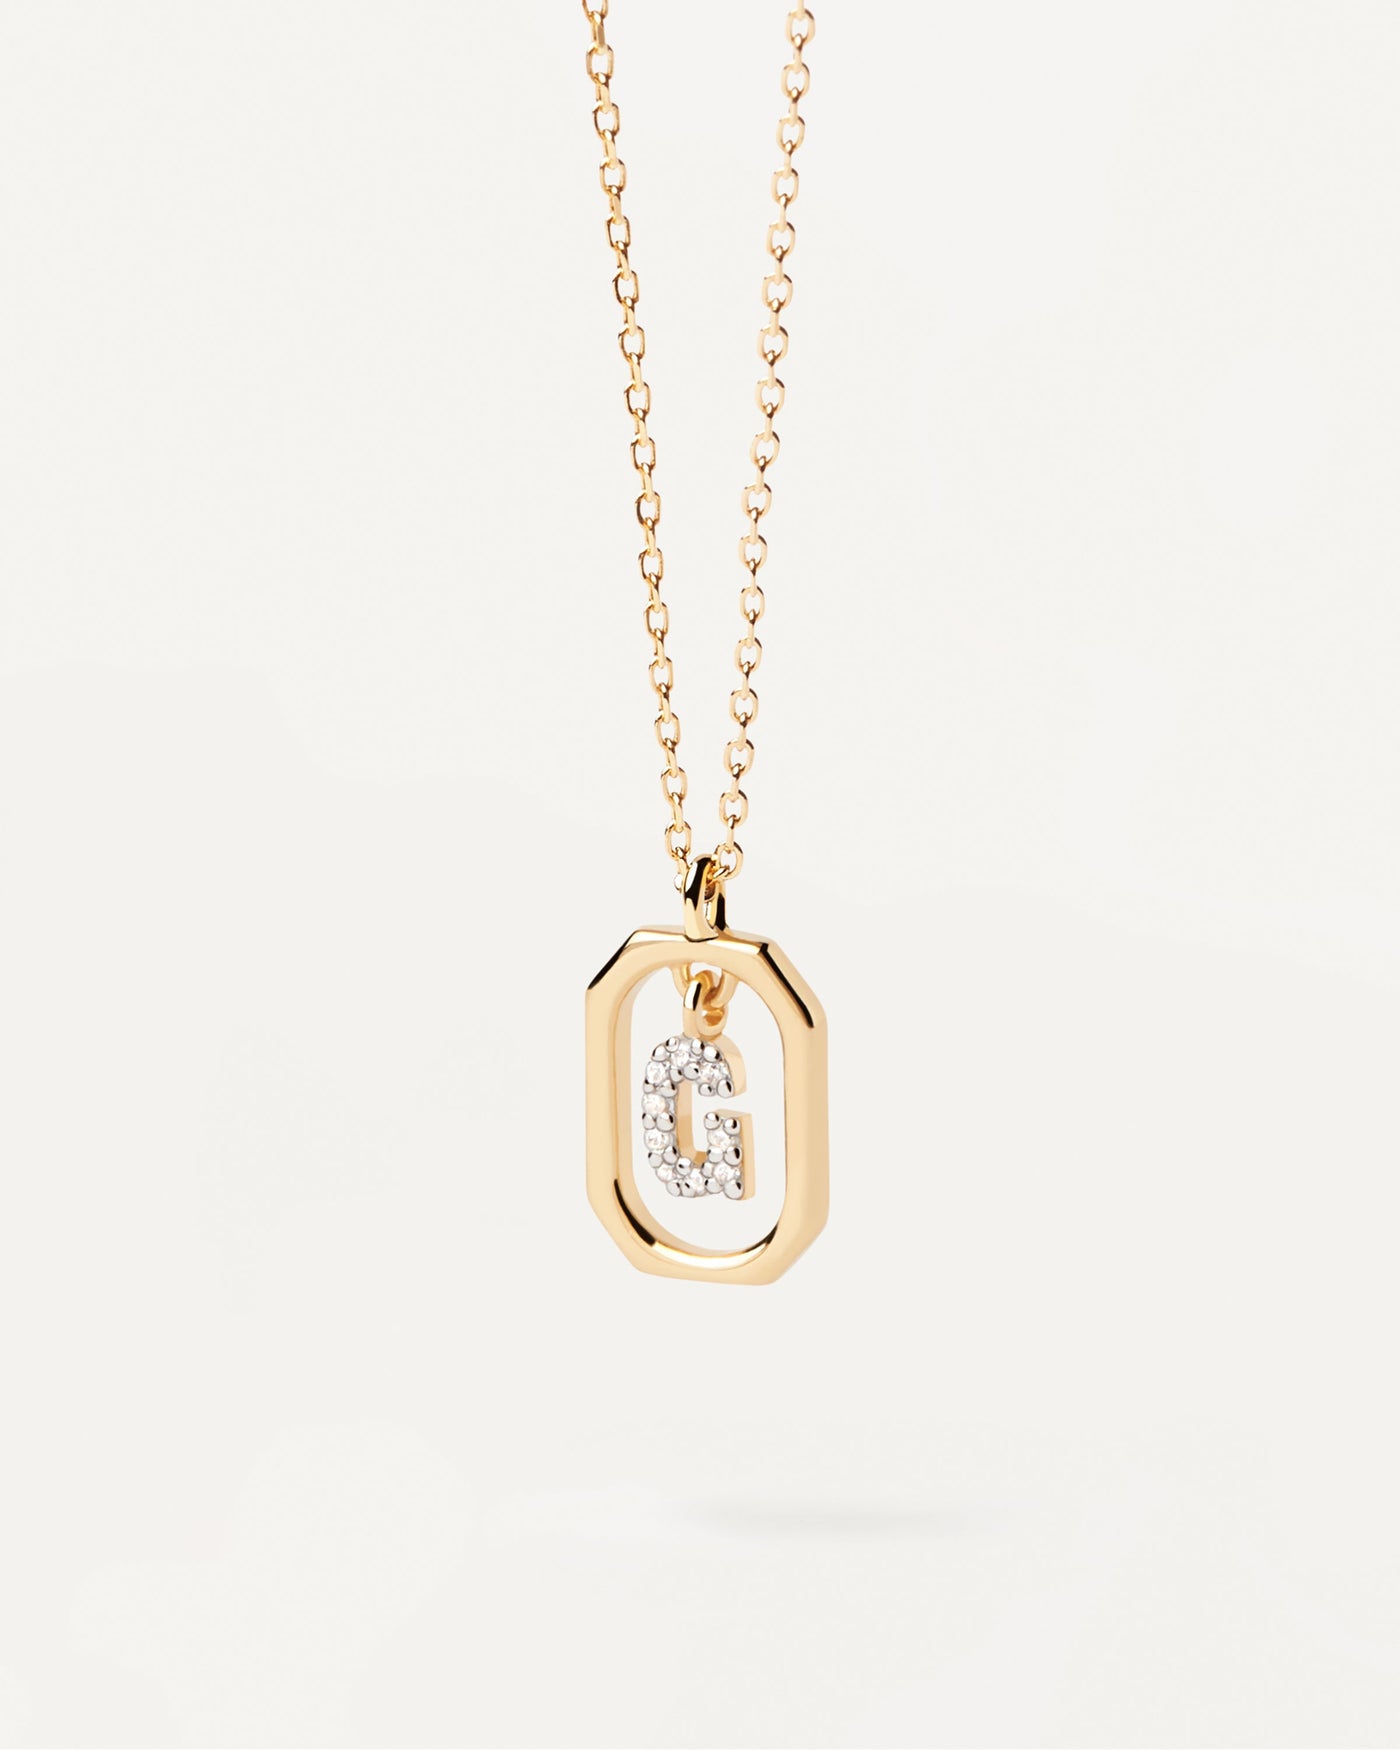 2023 Selection | Mini Letter G Necklace. Small initial G necklace in zirconia inside gold-plated silver octagonal pendant. Get the latest arrival from PDPAOLA. Place your order safely and get this Best Seller. Free Shipping.